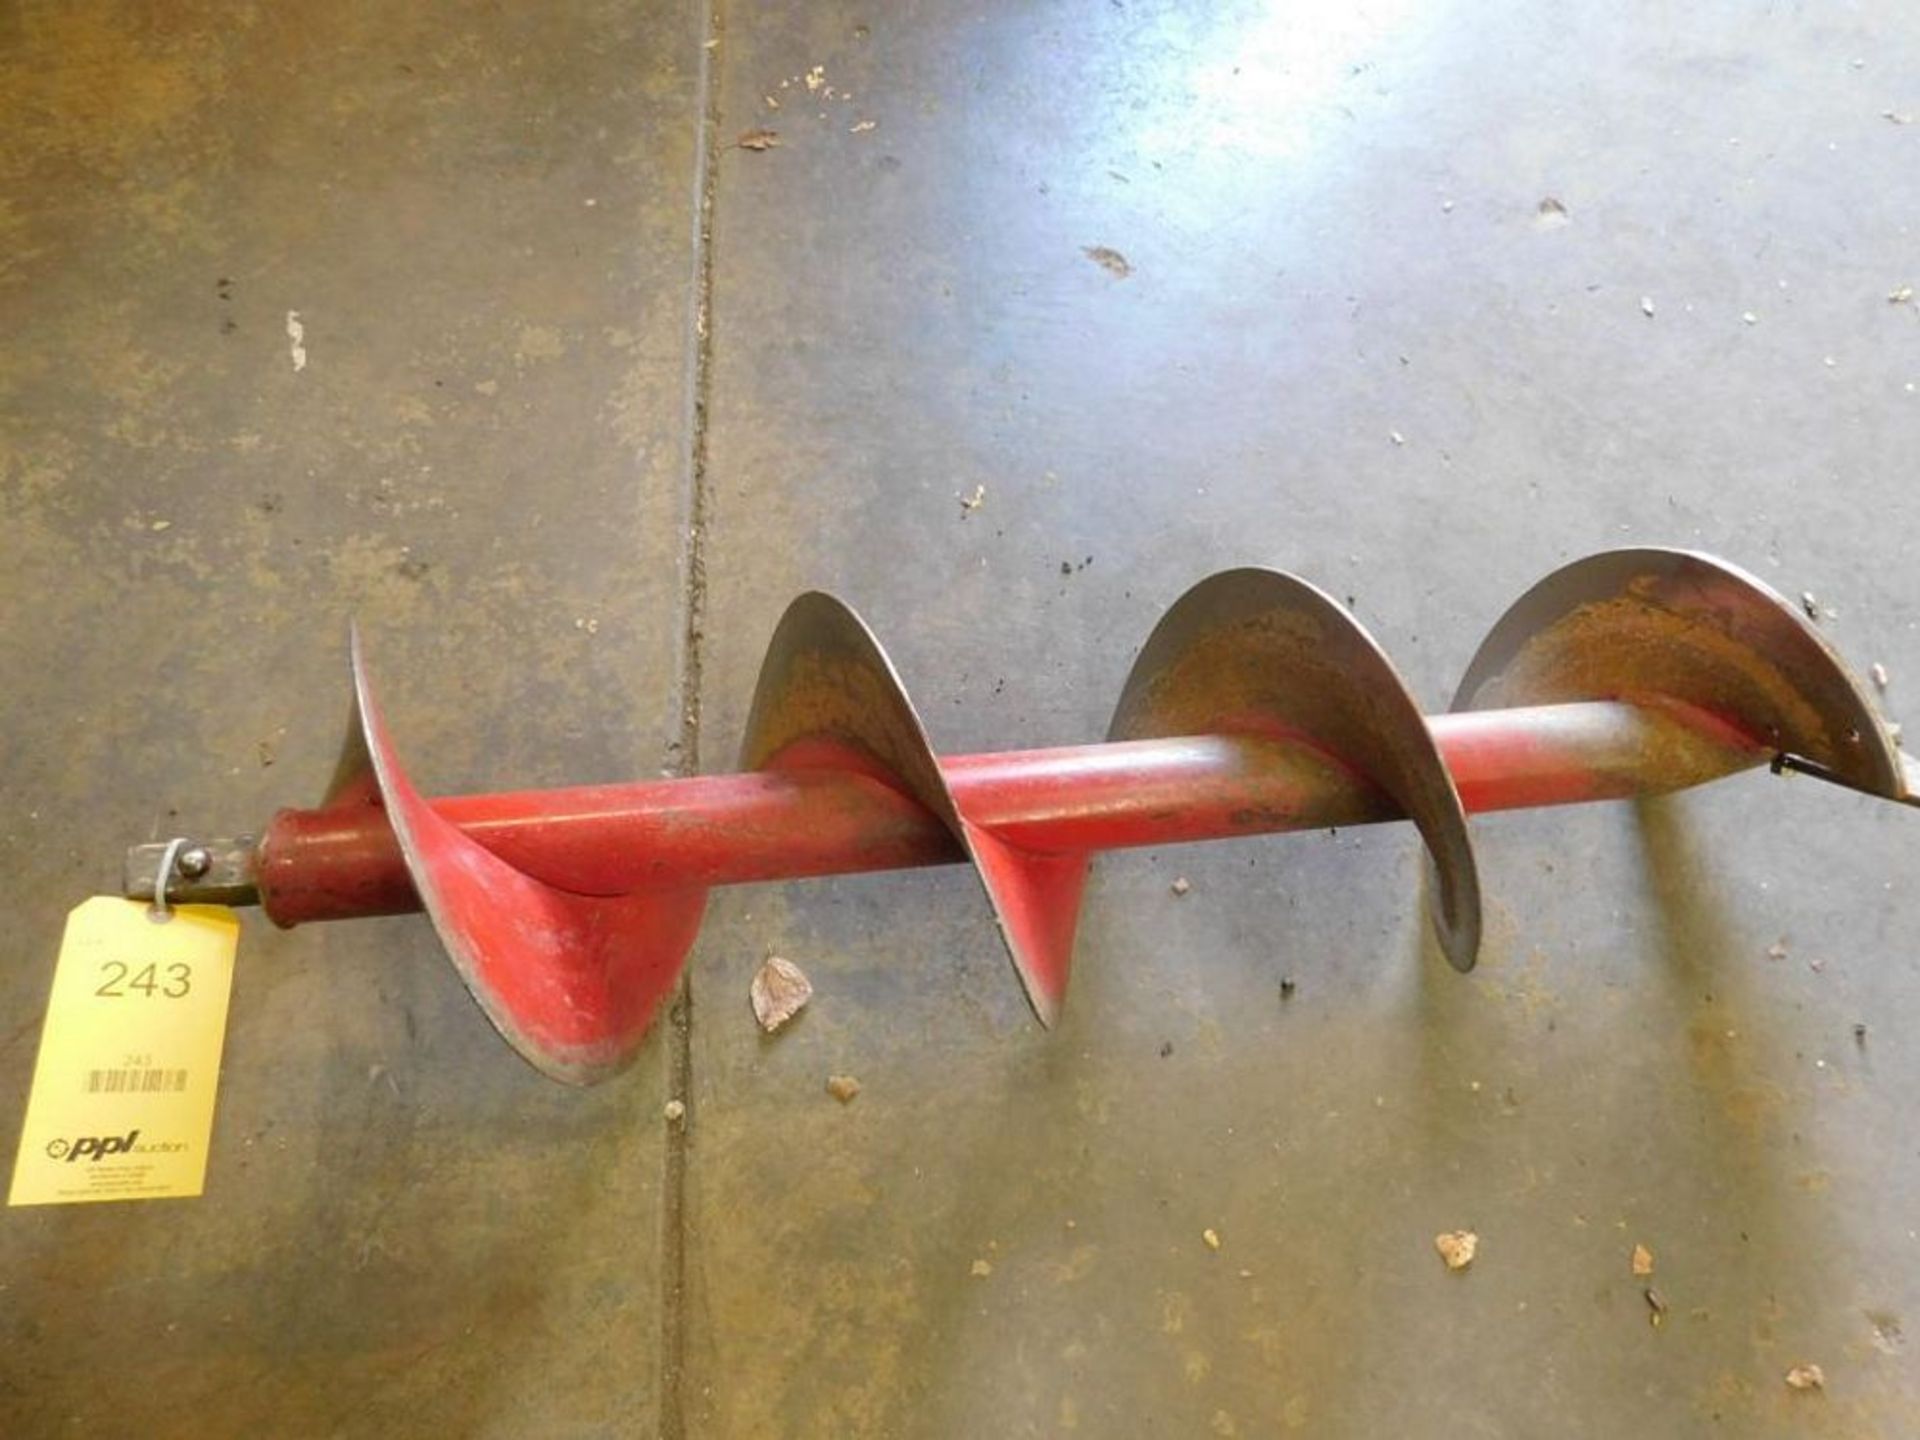 12" x 42" Post Hole Auger Bit (LOCATION: 318 N. Milwaukee Ave., Wheeling, IL 60090) - Image 3 of 4